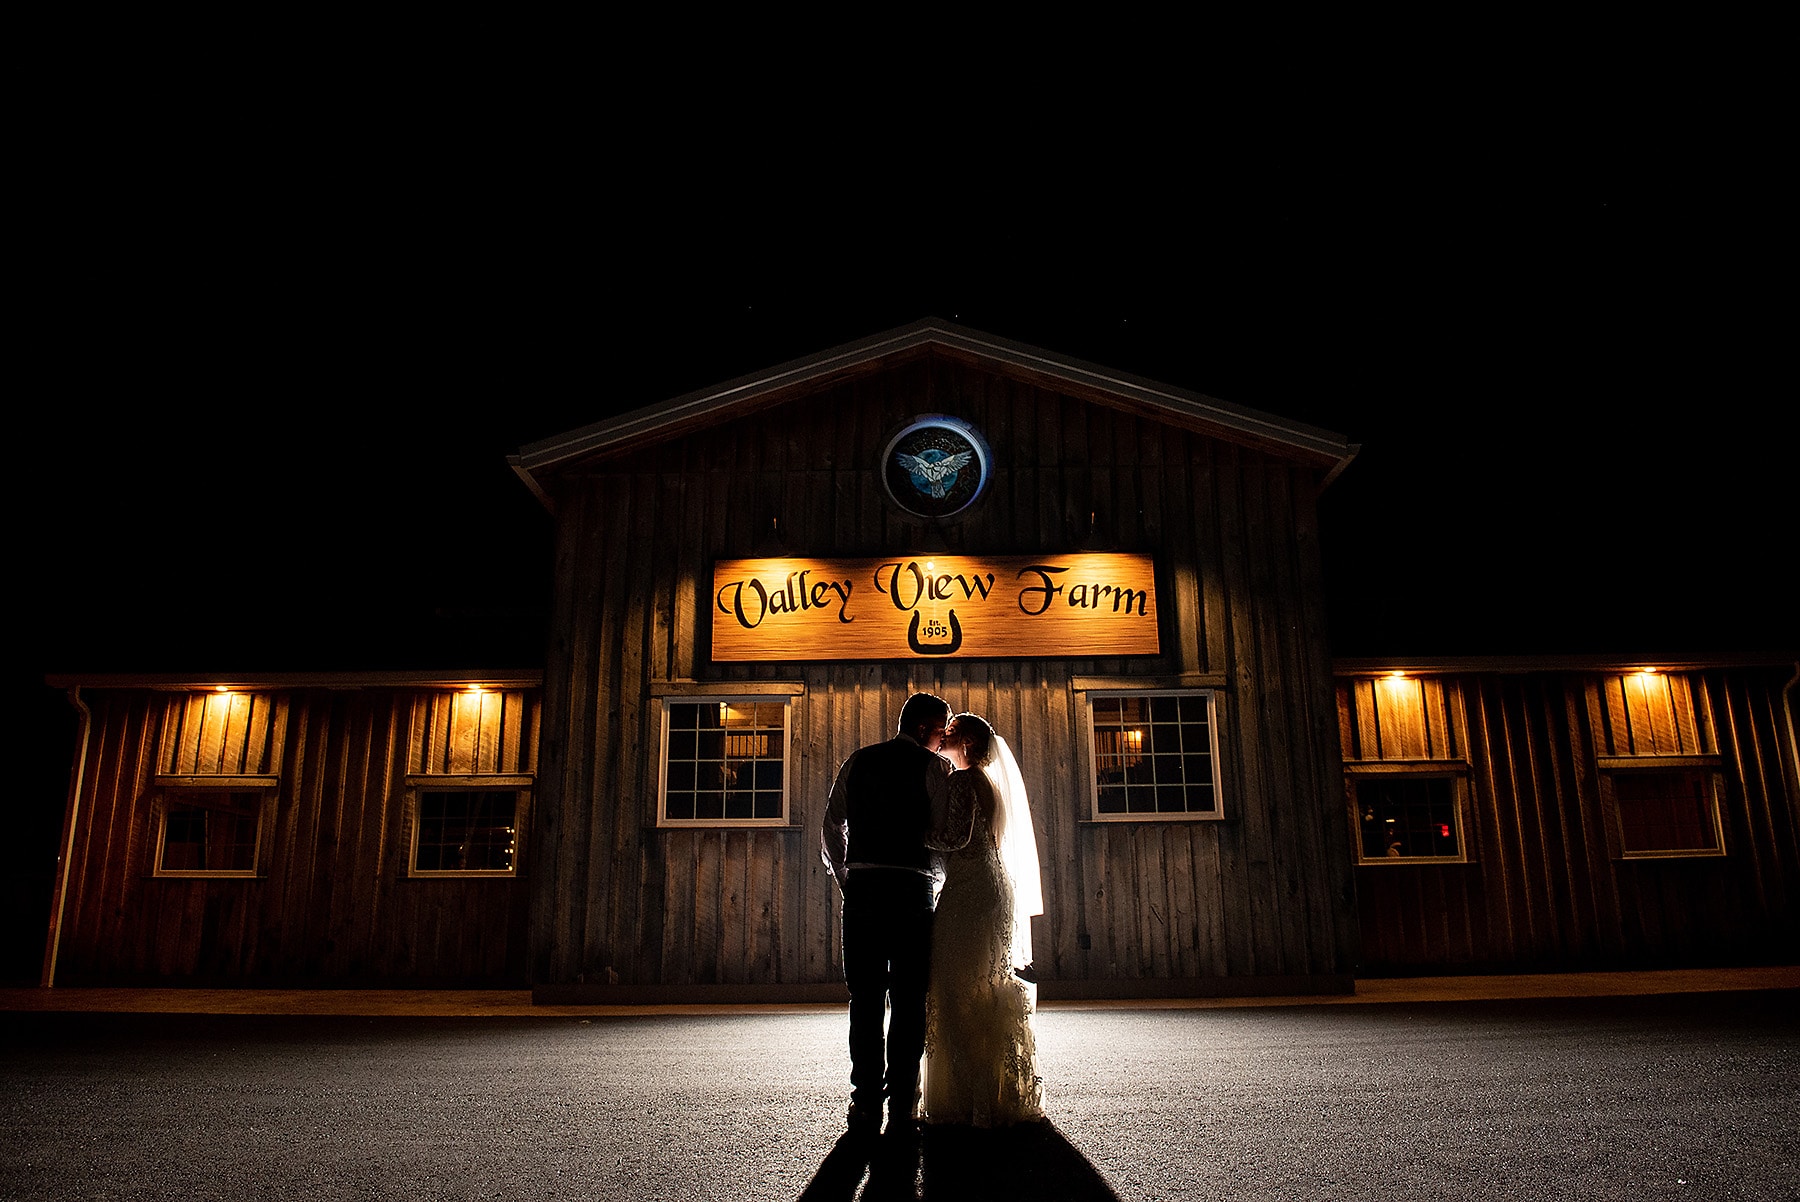 Valley View Farm Venue - Night Picture in Front of Barn